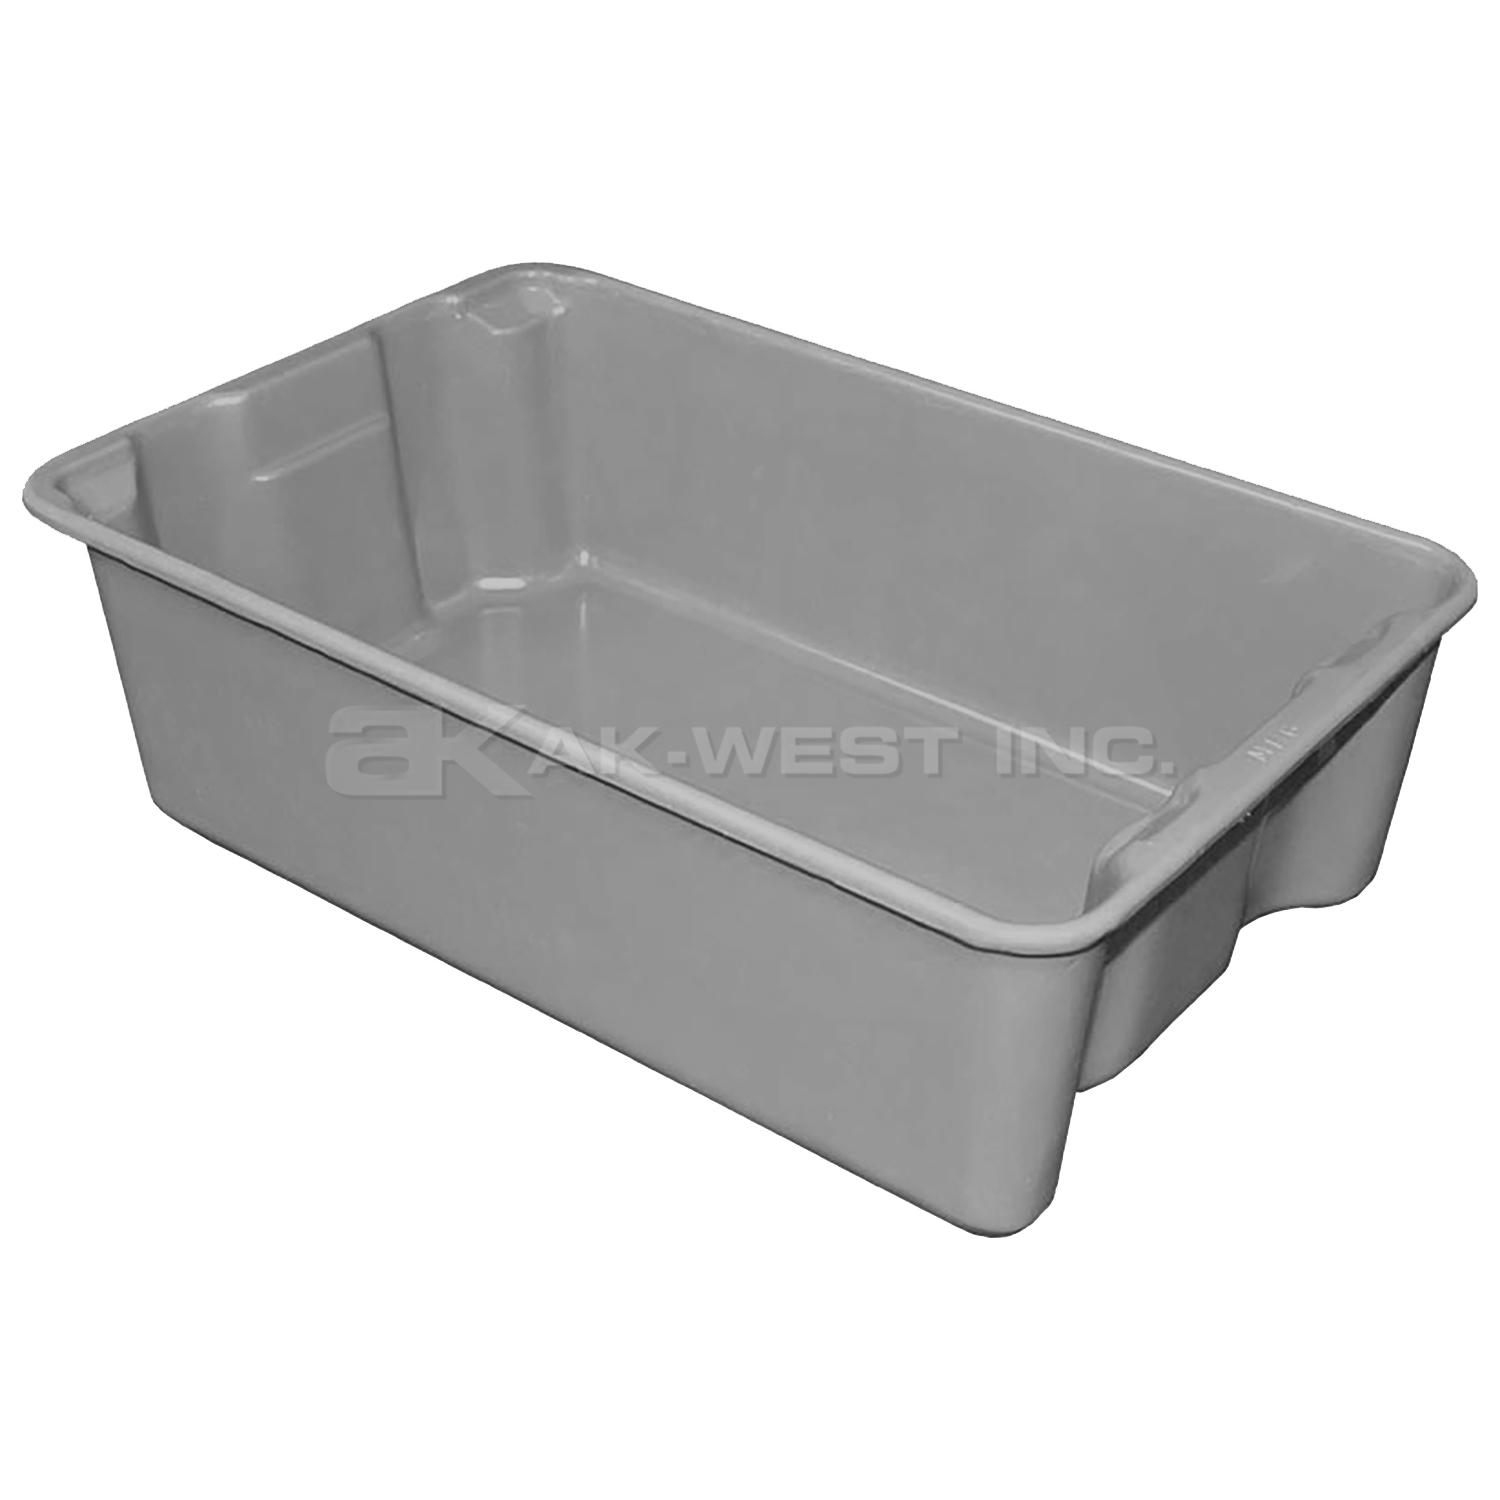 Grey, 19-3/4"L x 12-1/2"W x 6"H, Fiberglass Reinforced Stack and Nest Container